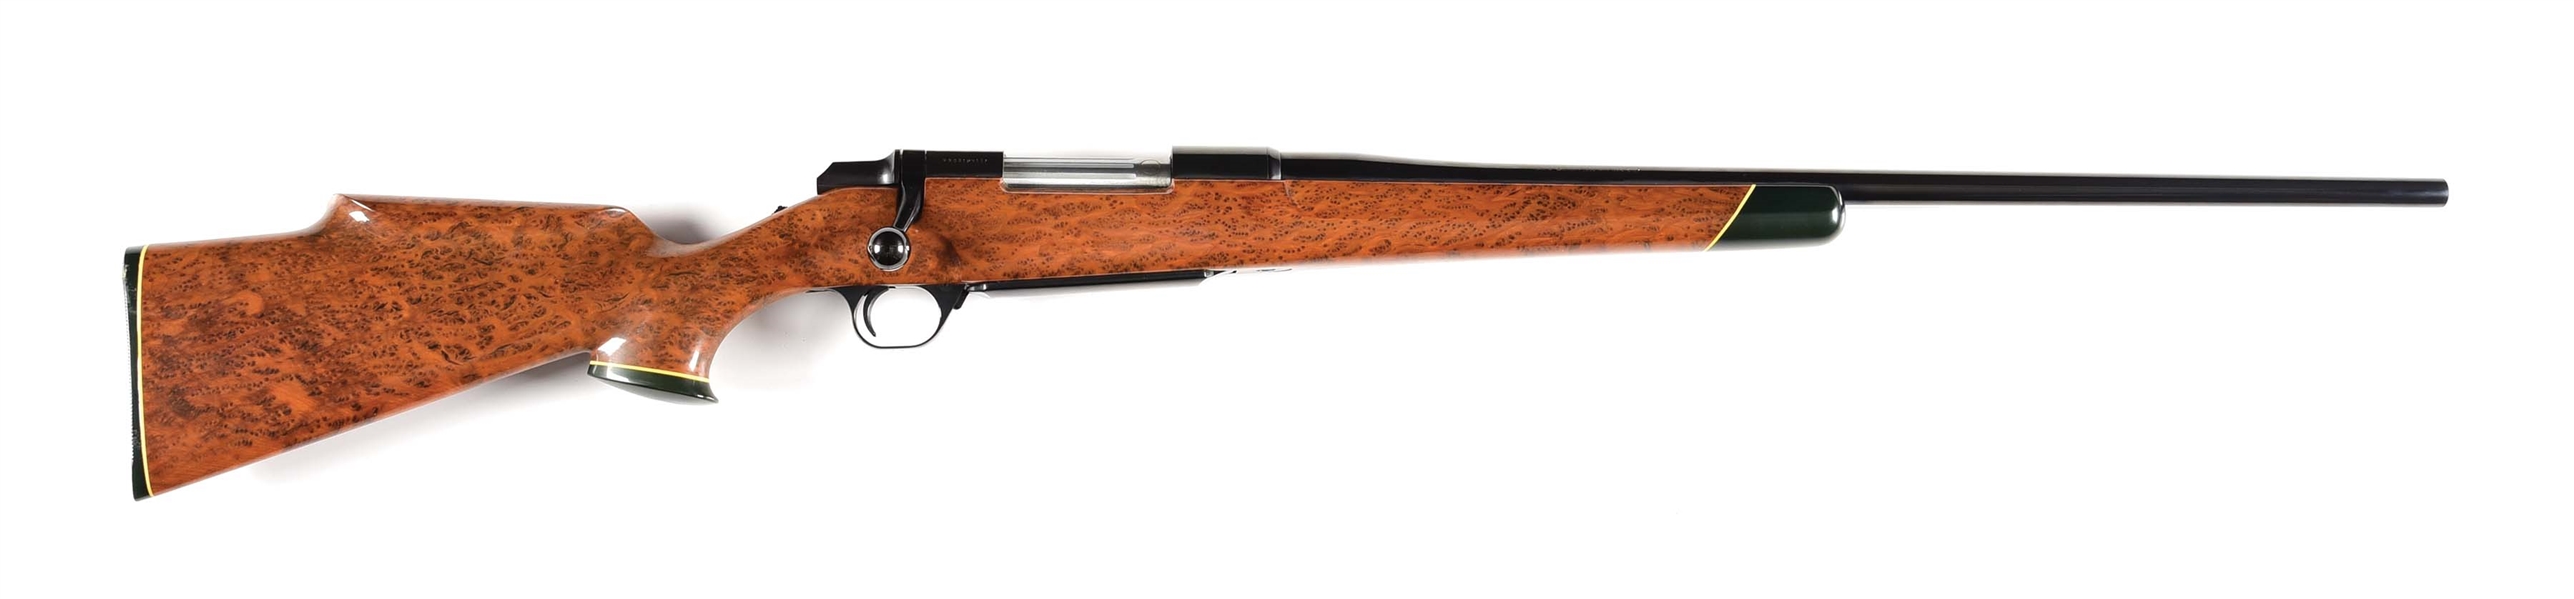 (M) REDWOOD BURL STOCKED BROWNING BBR BOLT ACTION RIFLE.